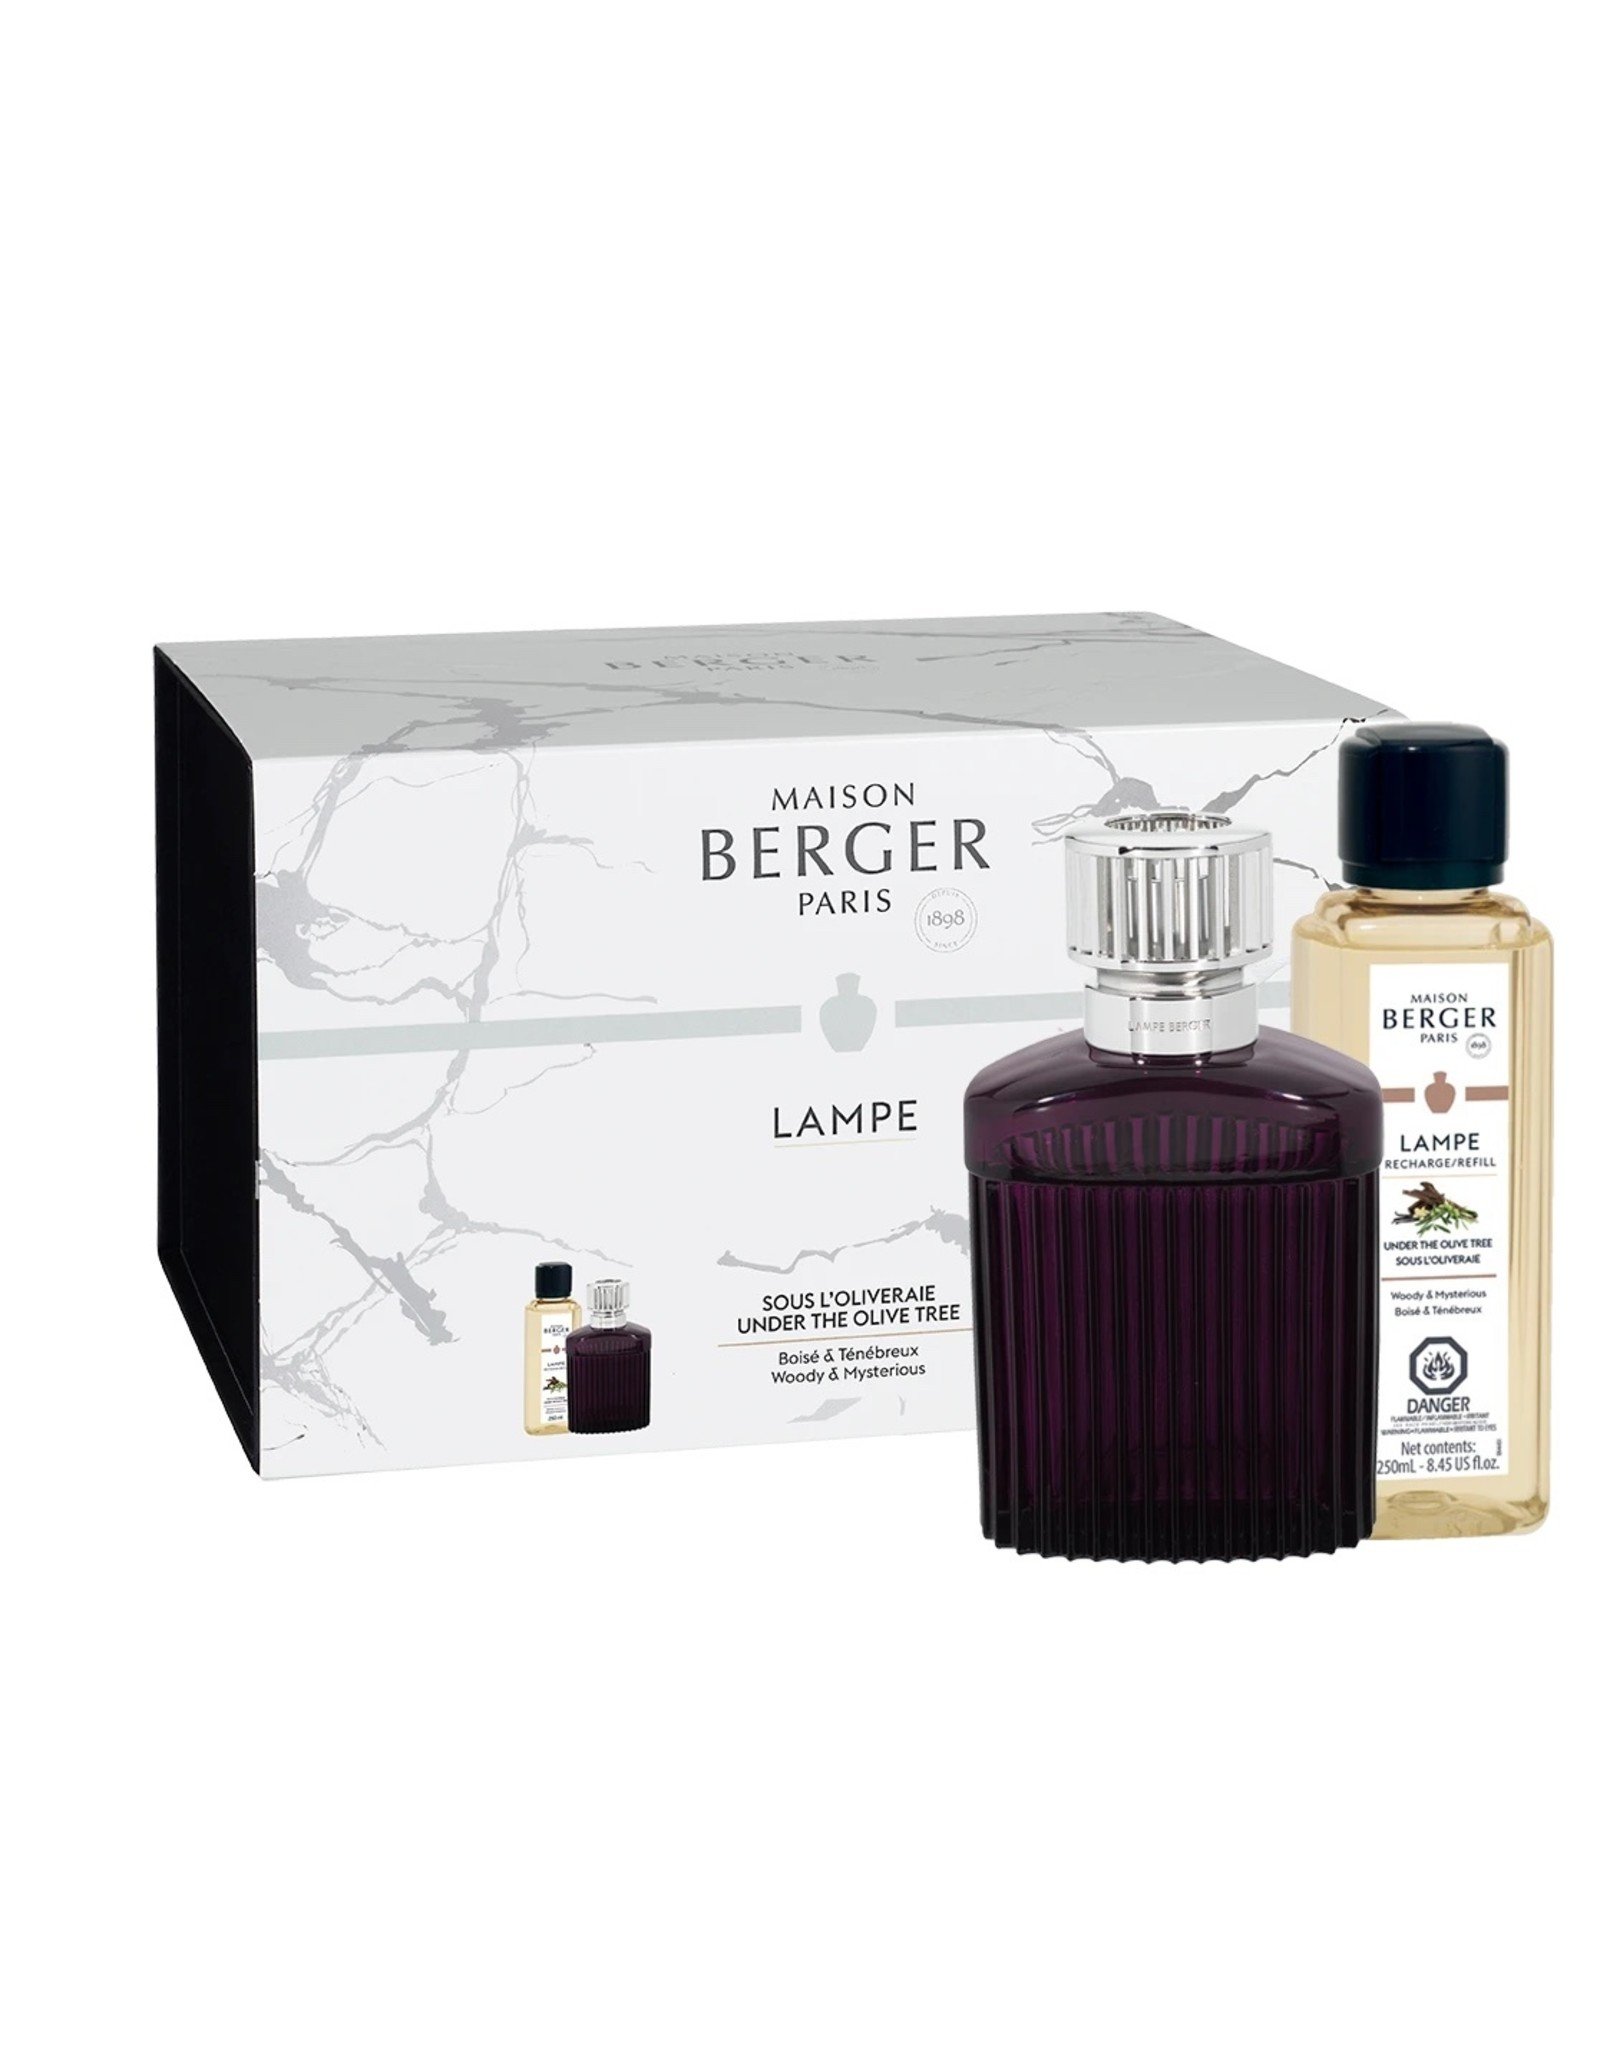 Maison Berger Alpha Scandalous Plum Lamp Gift Set with Under the Olive Tree